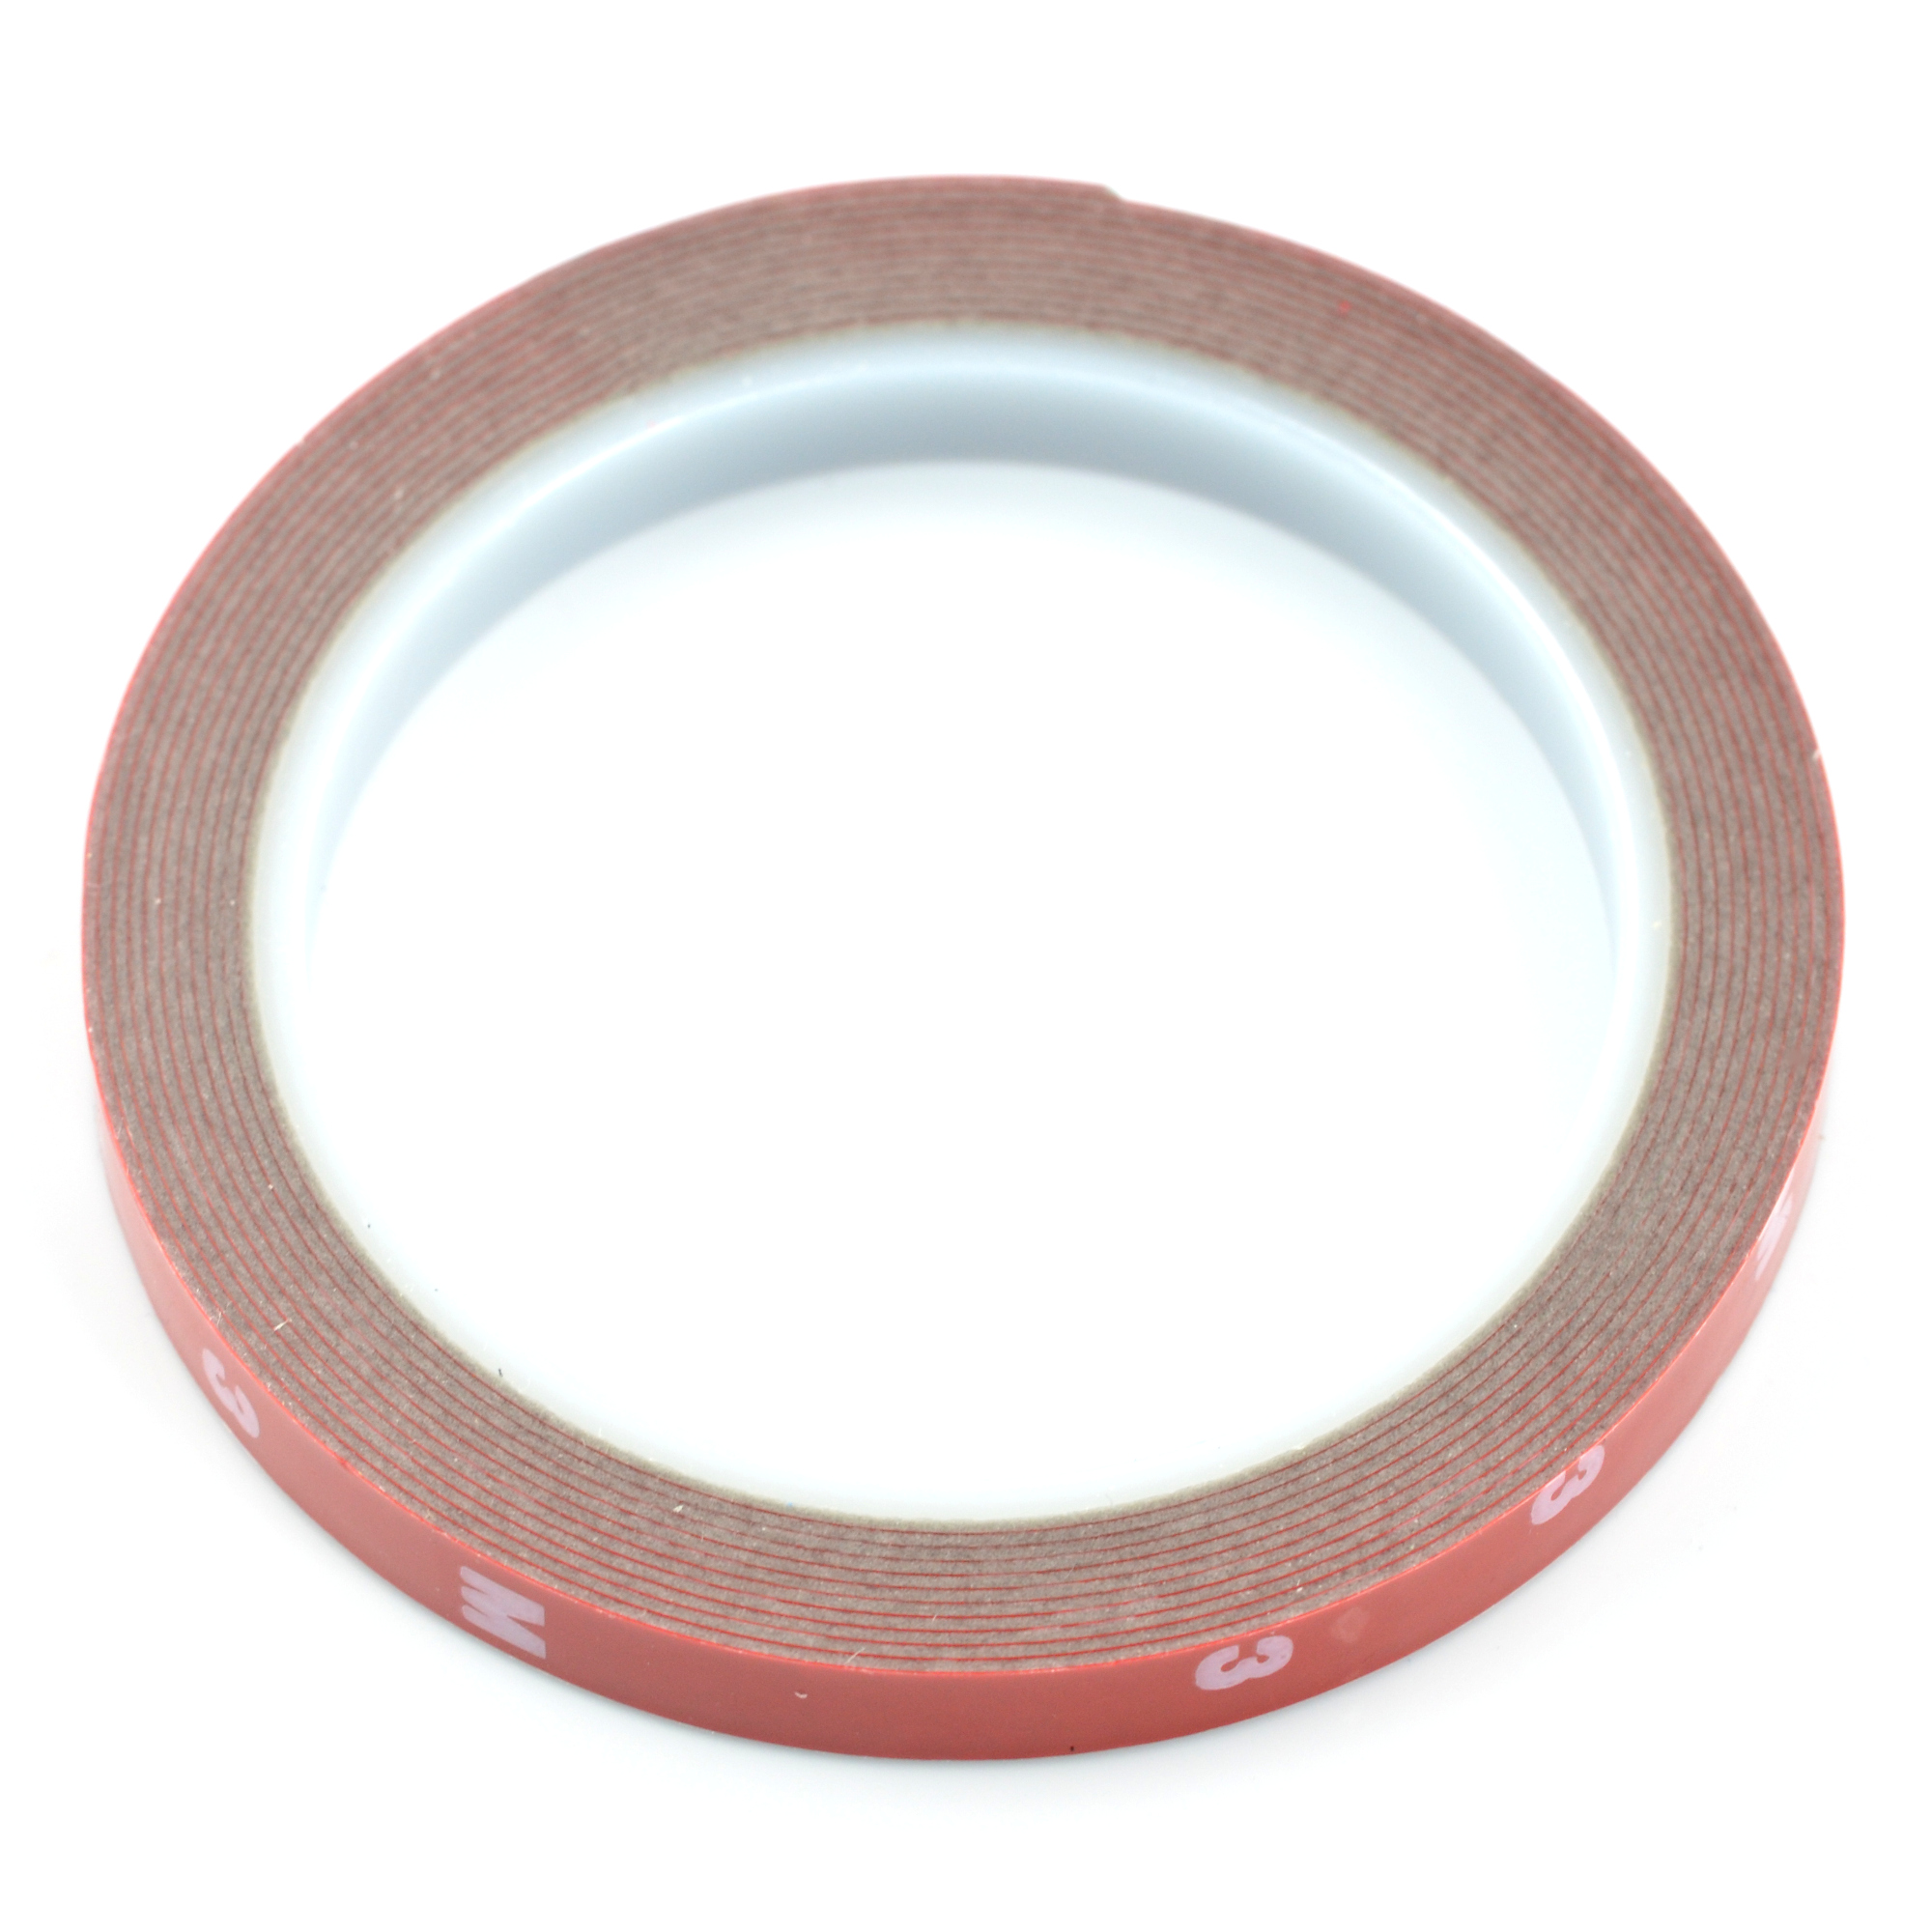 Acid Free Adhesive Tape, Double Sided White 19mm x 30M